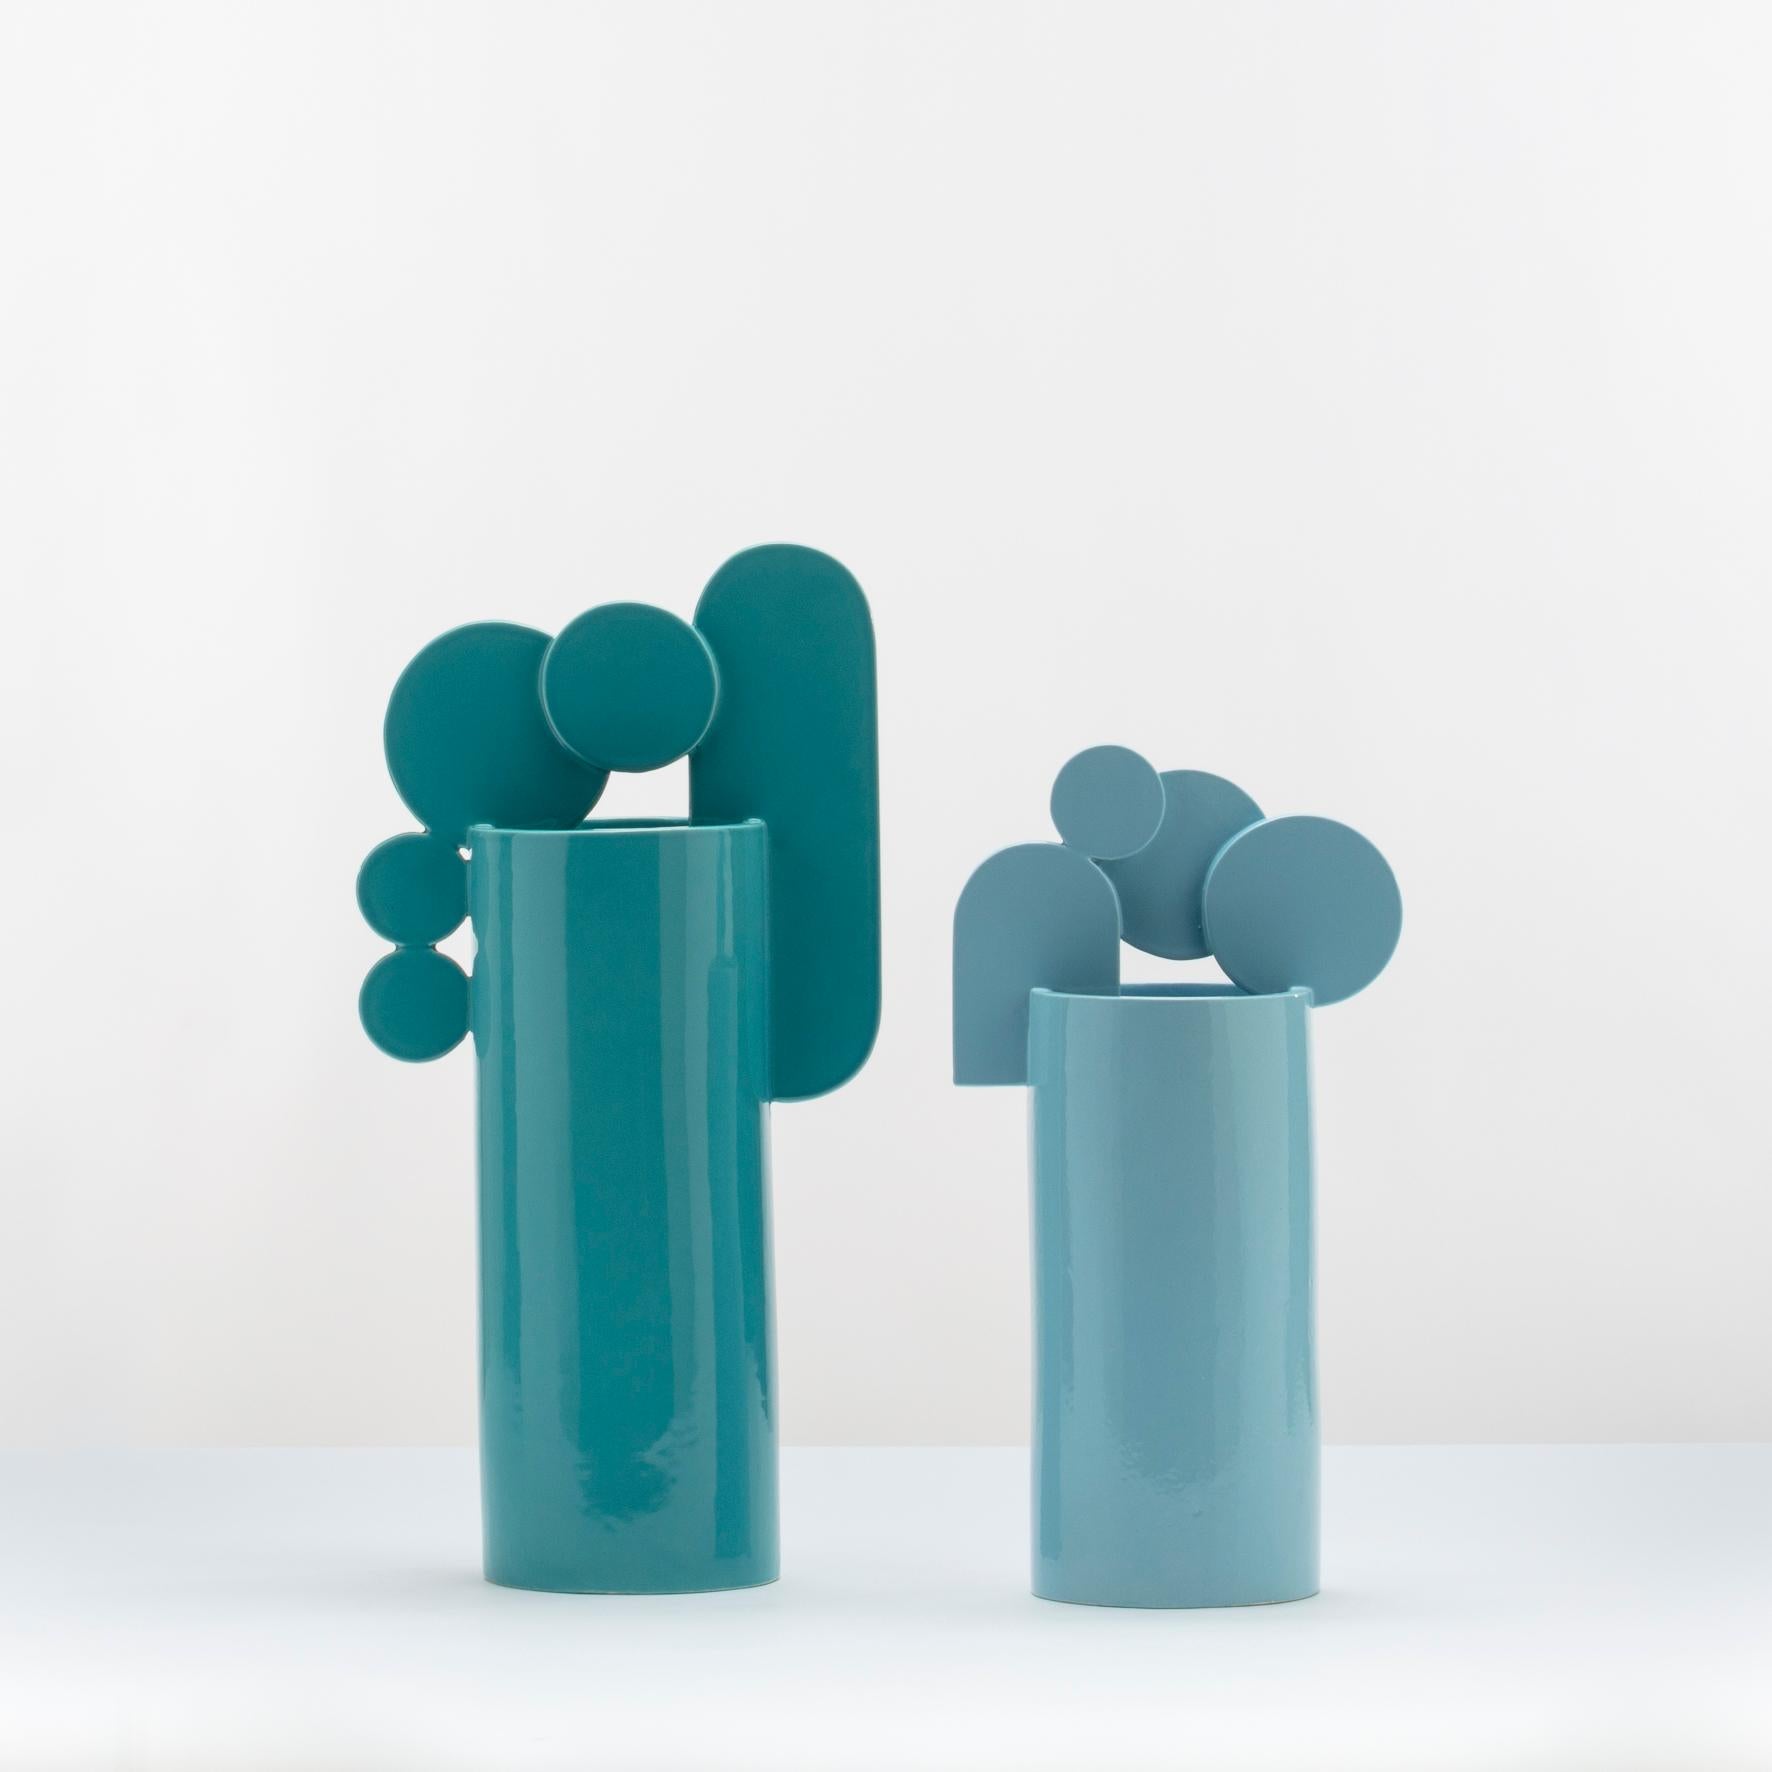 The Cielo di Roma vase is an explicit tribute to that unique blue, that special light that envelops everything in Rome.
It is part of the Bubble Family Collection and like all CuoreCarpenito vases are made entirely and personally by hand by the